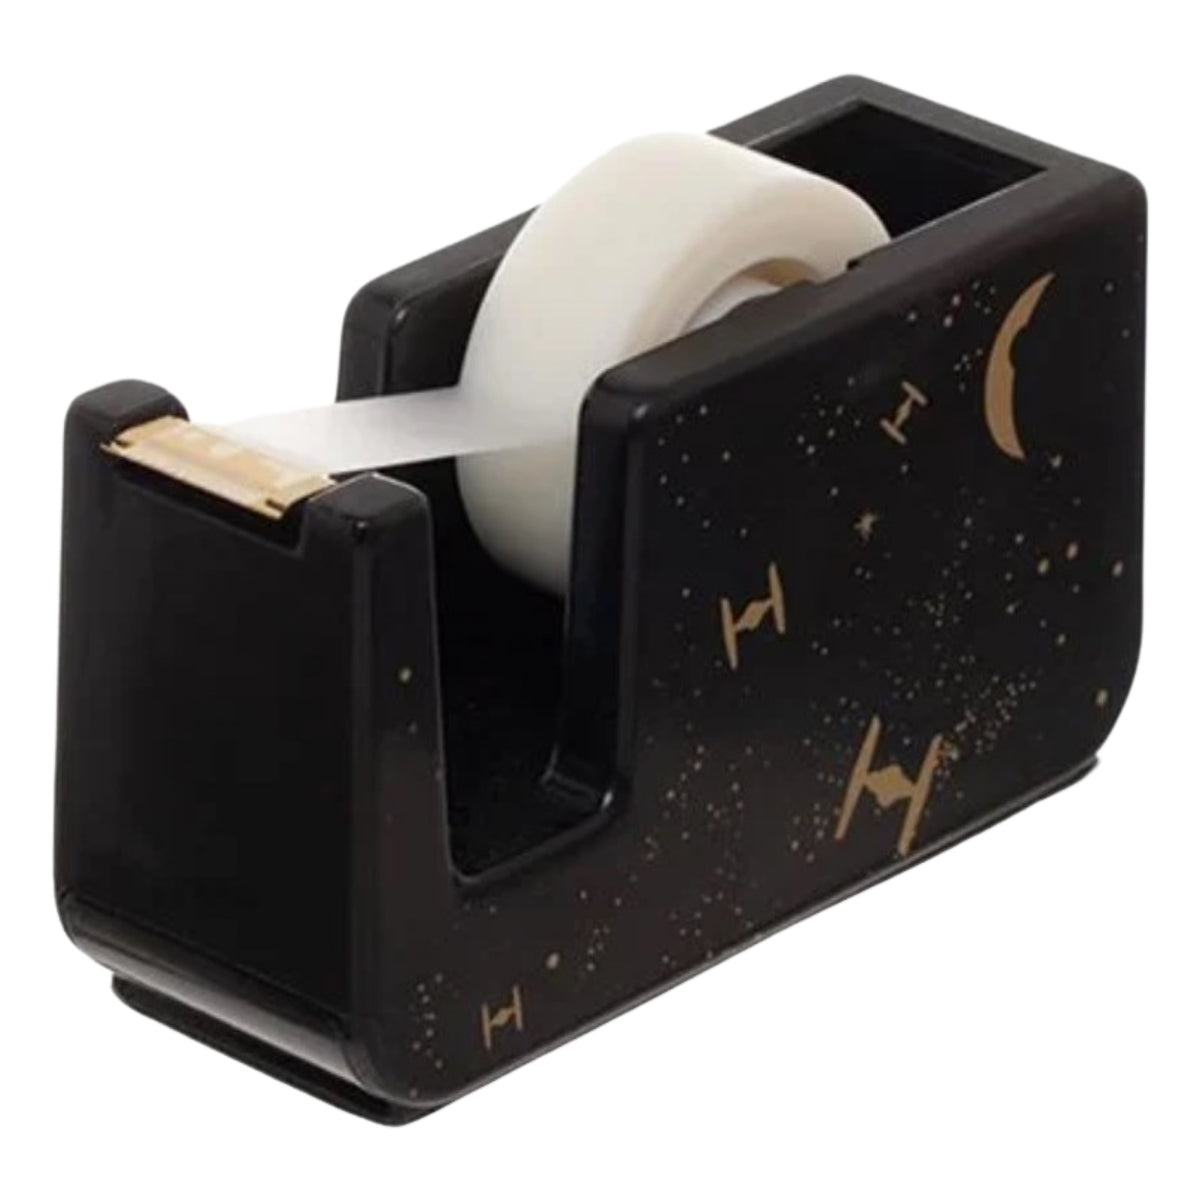 Star Wars Tie Fighter Tape Dispenser -  May The Tape Be With You